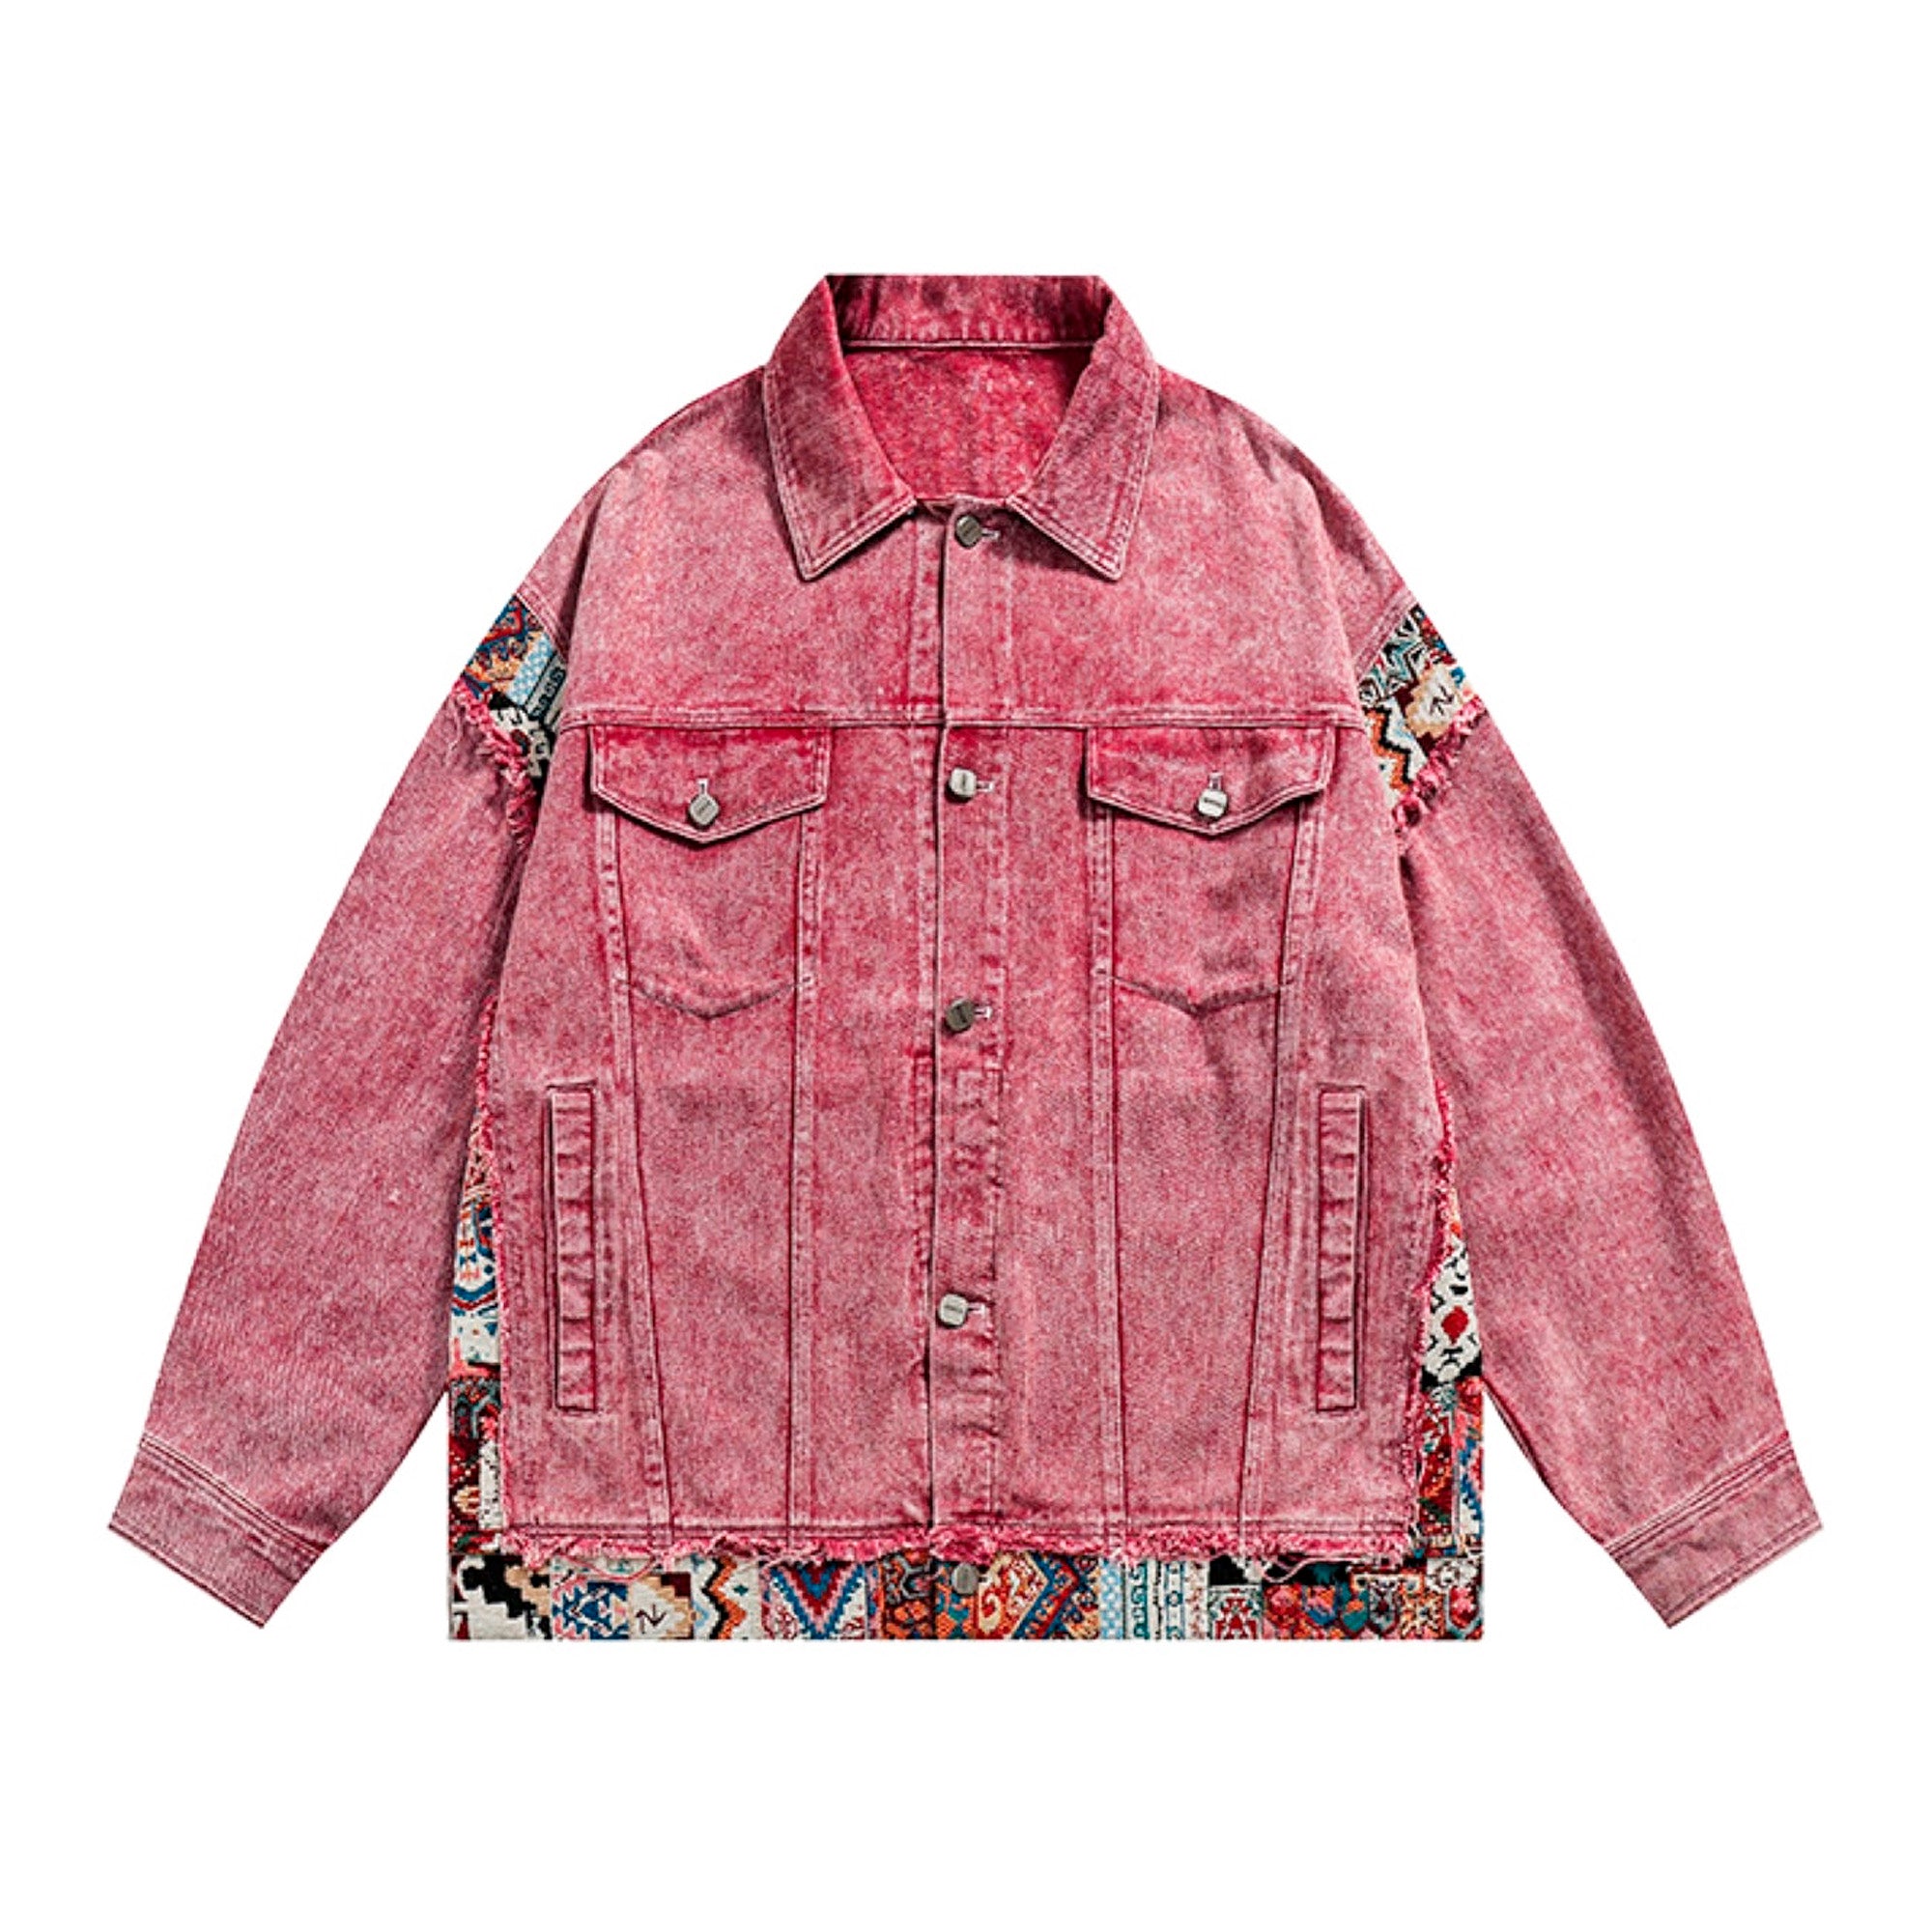 Denim jacket remade in ethnic style